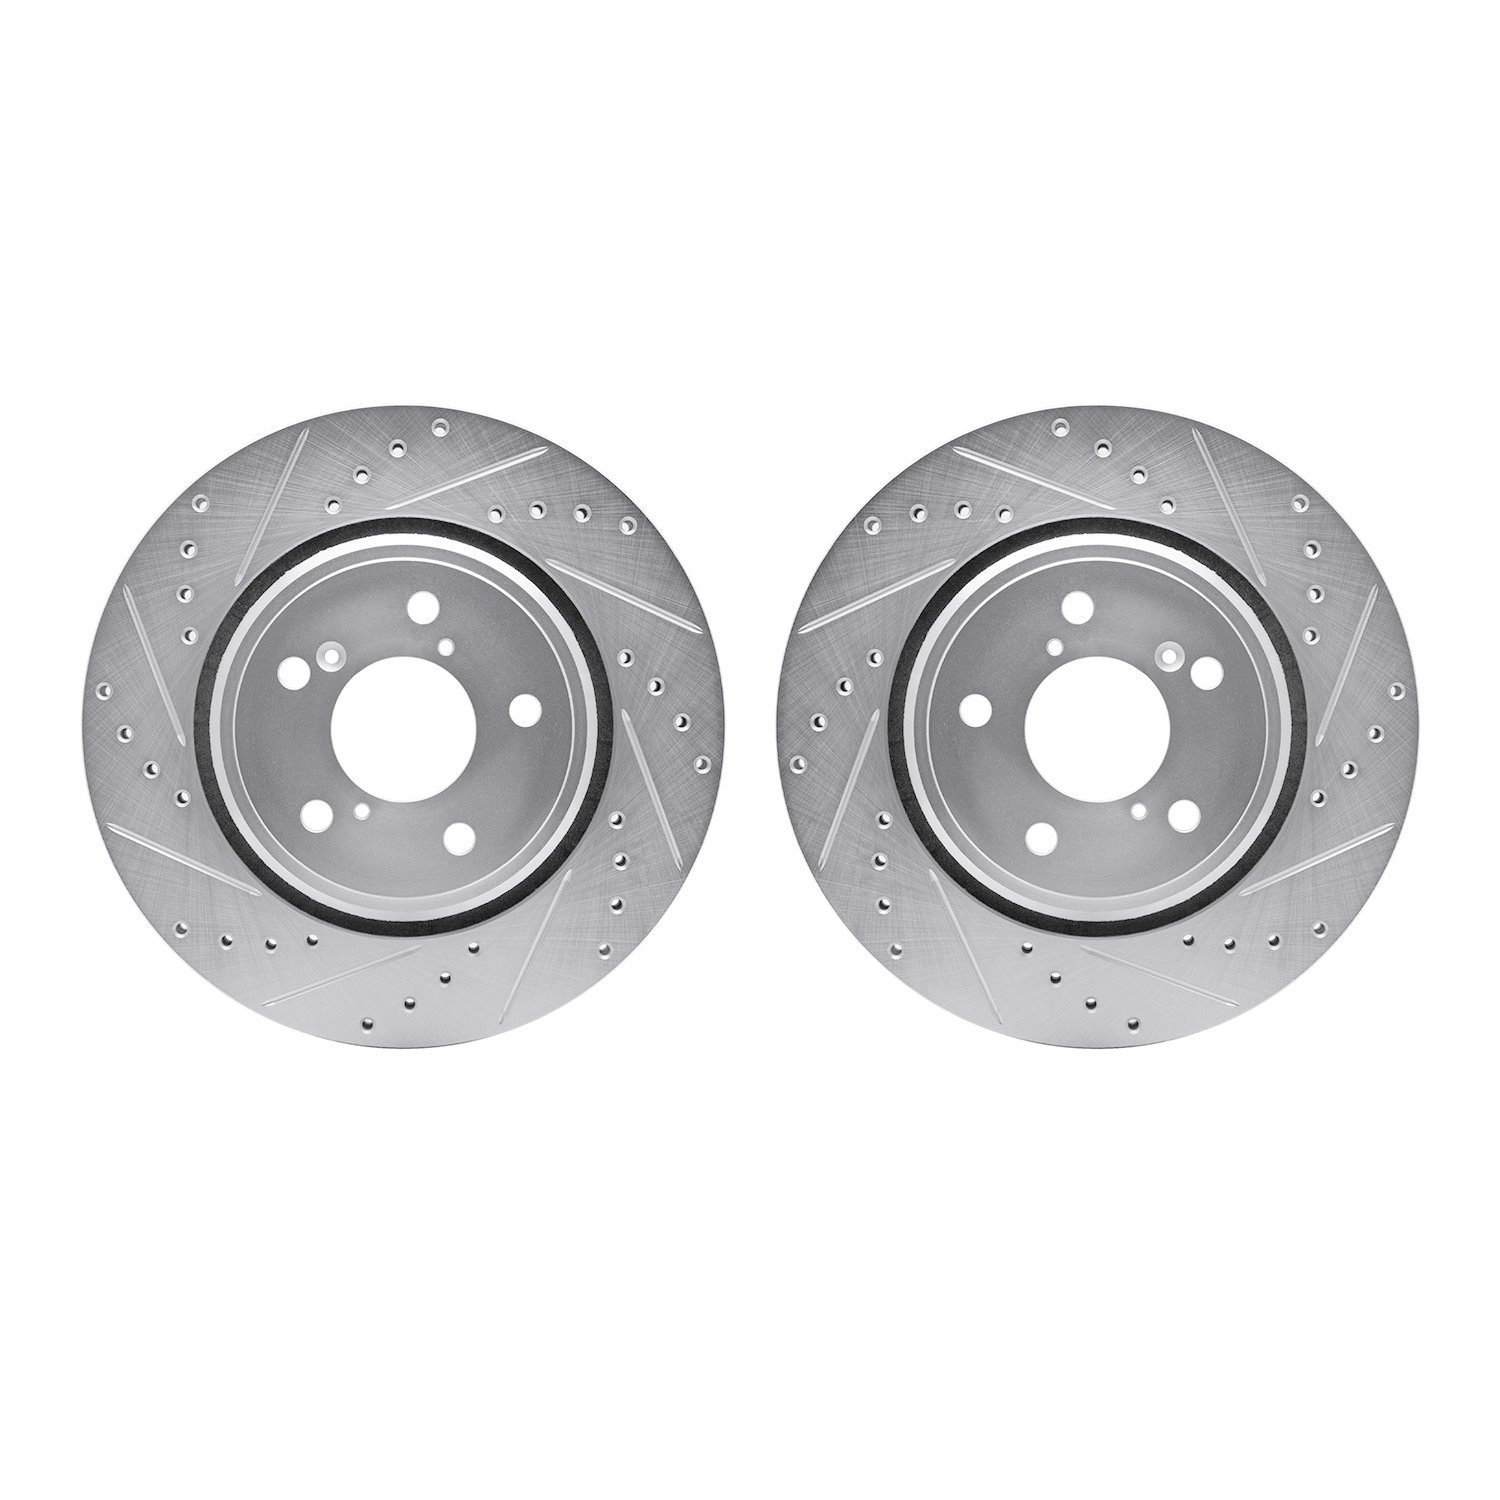 7002-59013 Drilled/Slotted Brake Rotors [Silver], Fits Select Acura/Honda, Position: Front